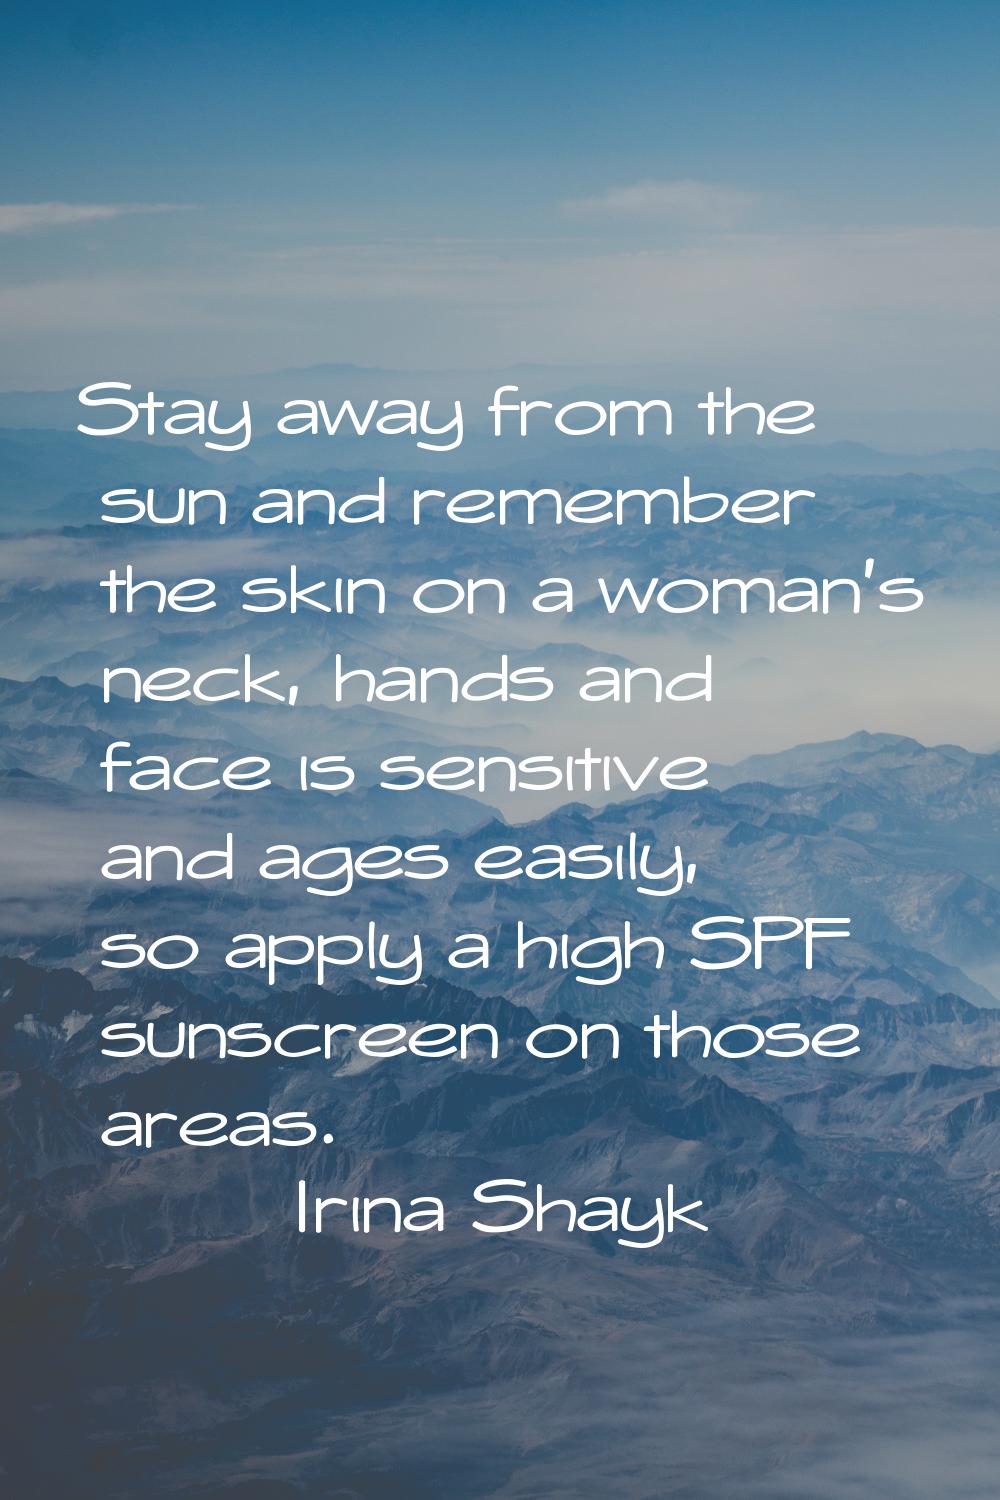 Stay away from the sun and remember the skin on a woman's neck, hands and face is sensitive and age